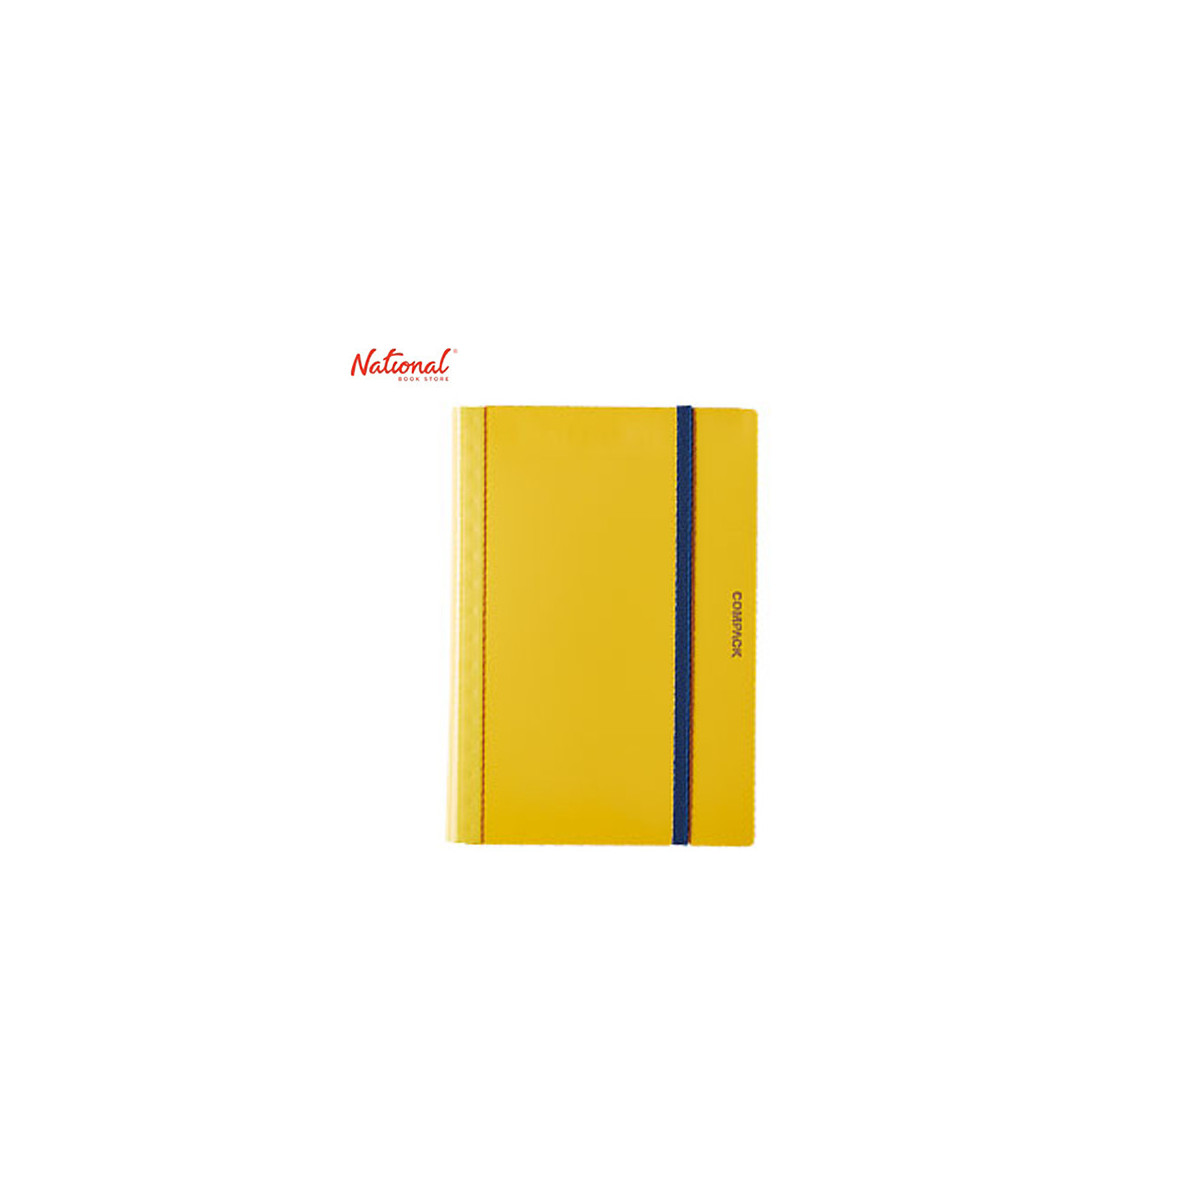 King Jim Clearbook Fixed 5894M A4 15Sheets Foldable Into A5 with Garter Lock, Yellow